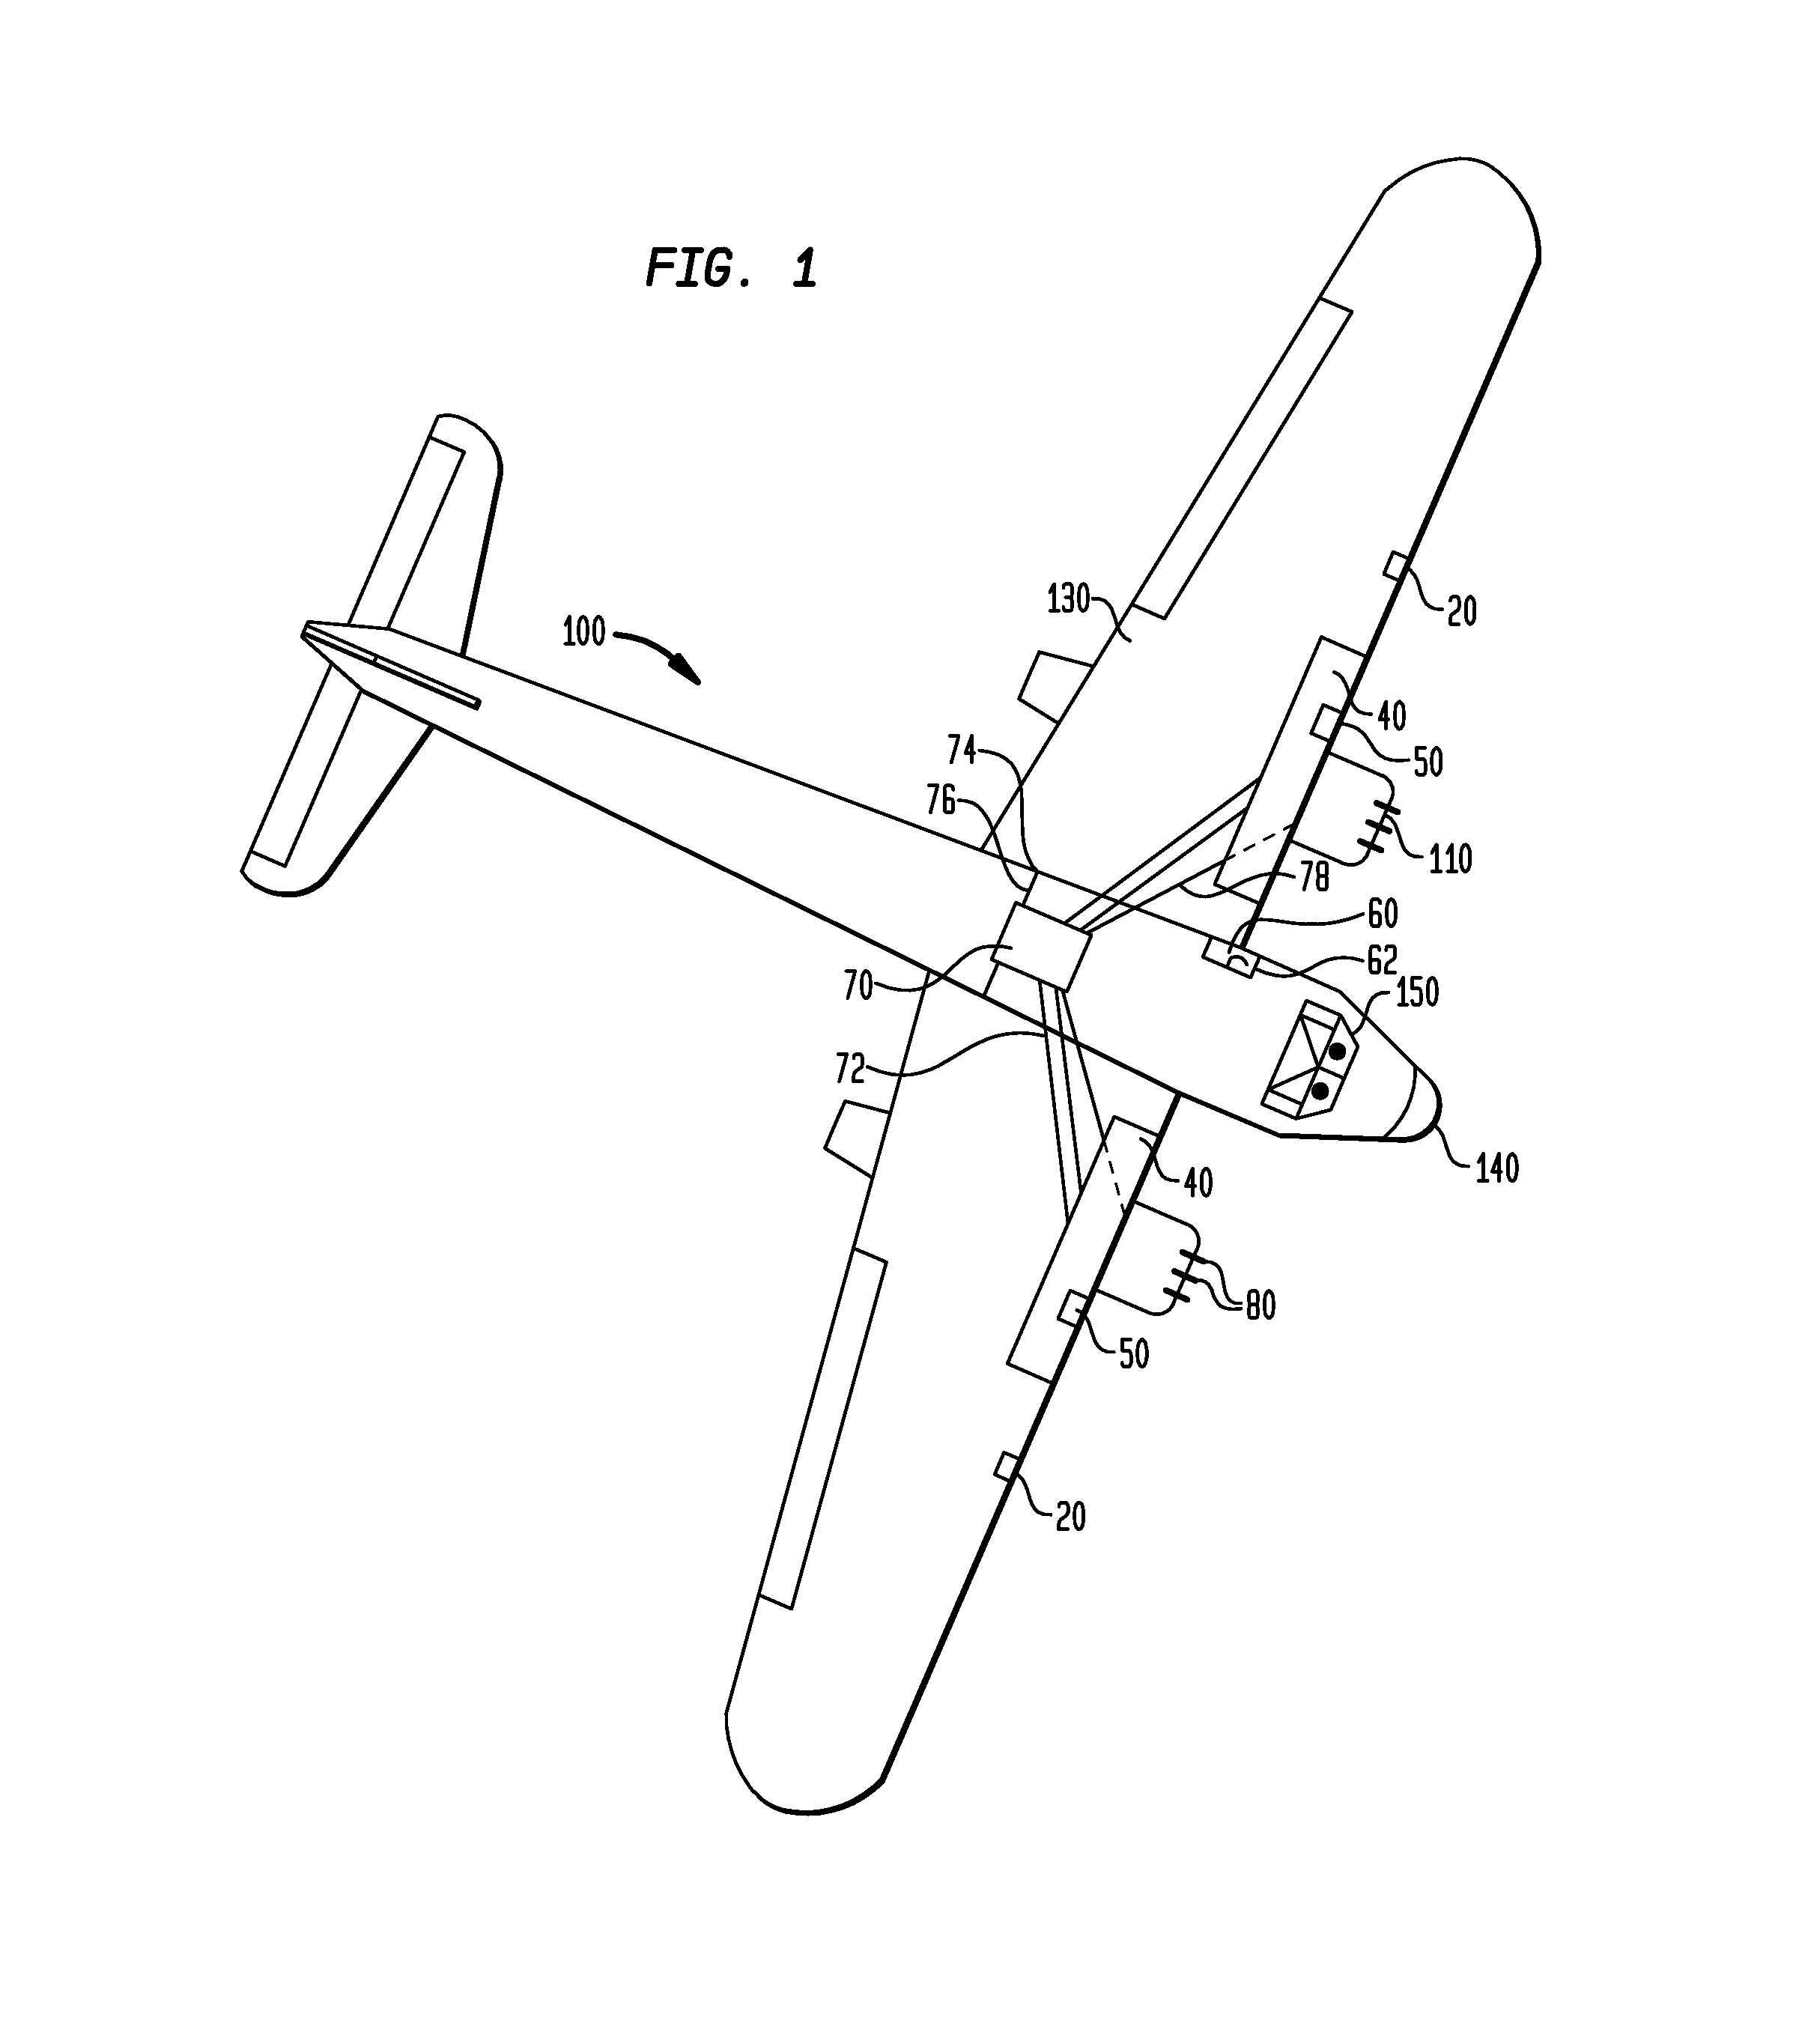 Foreign object damage protection device and system for aircraft